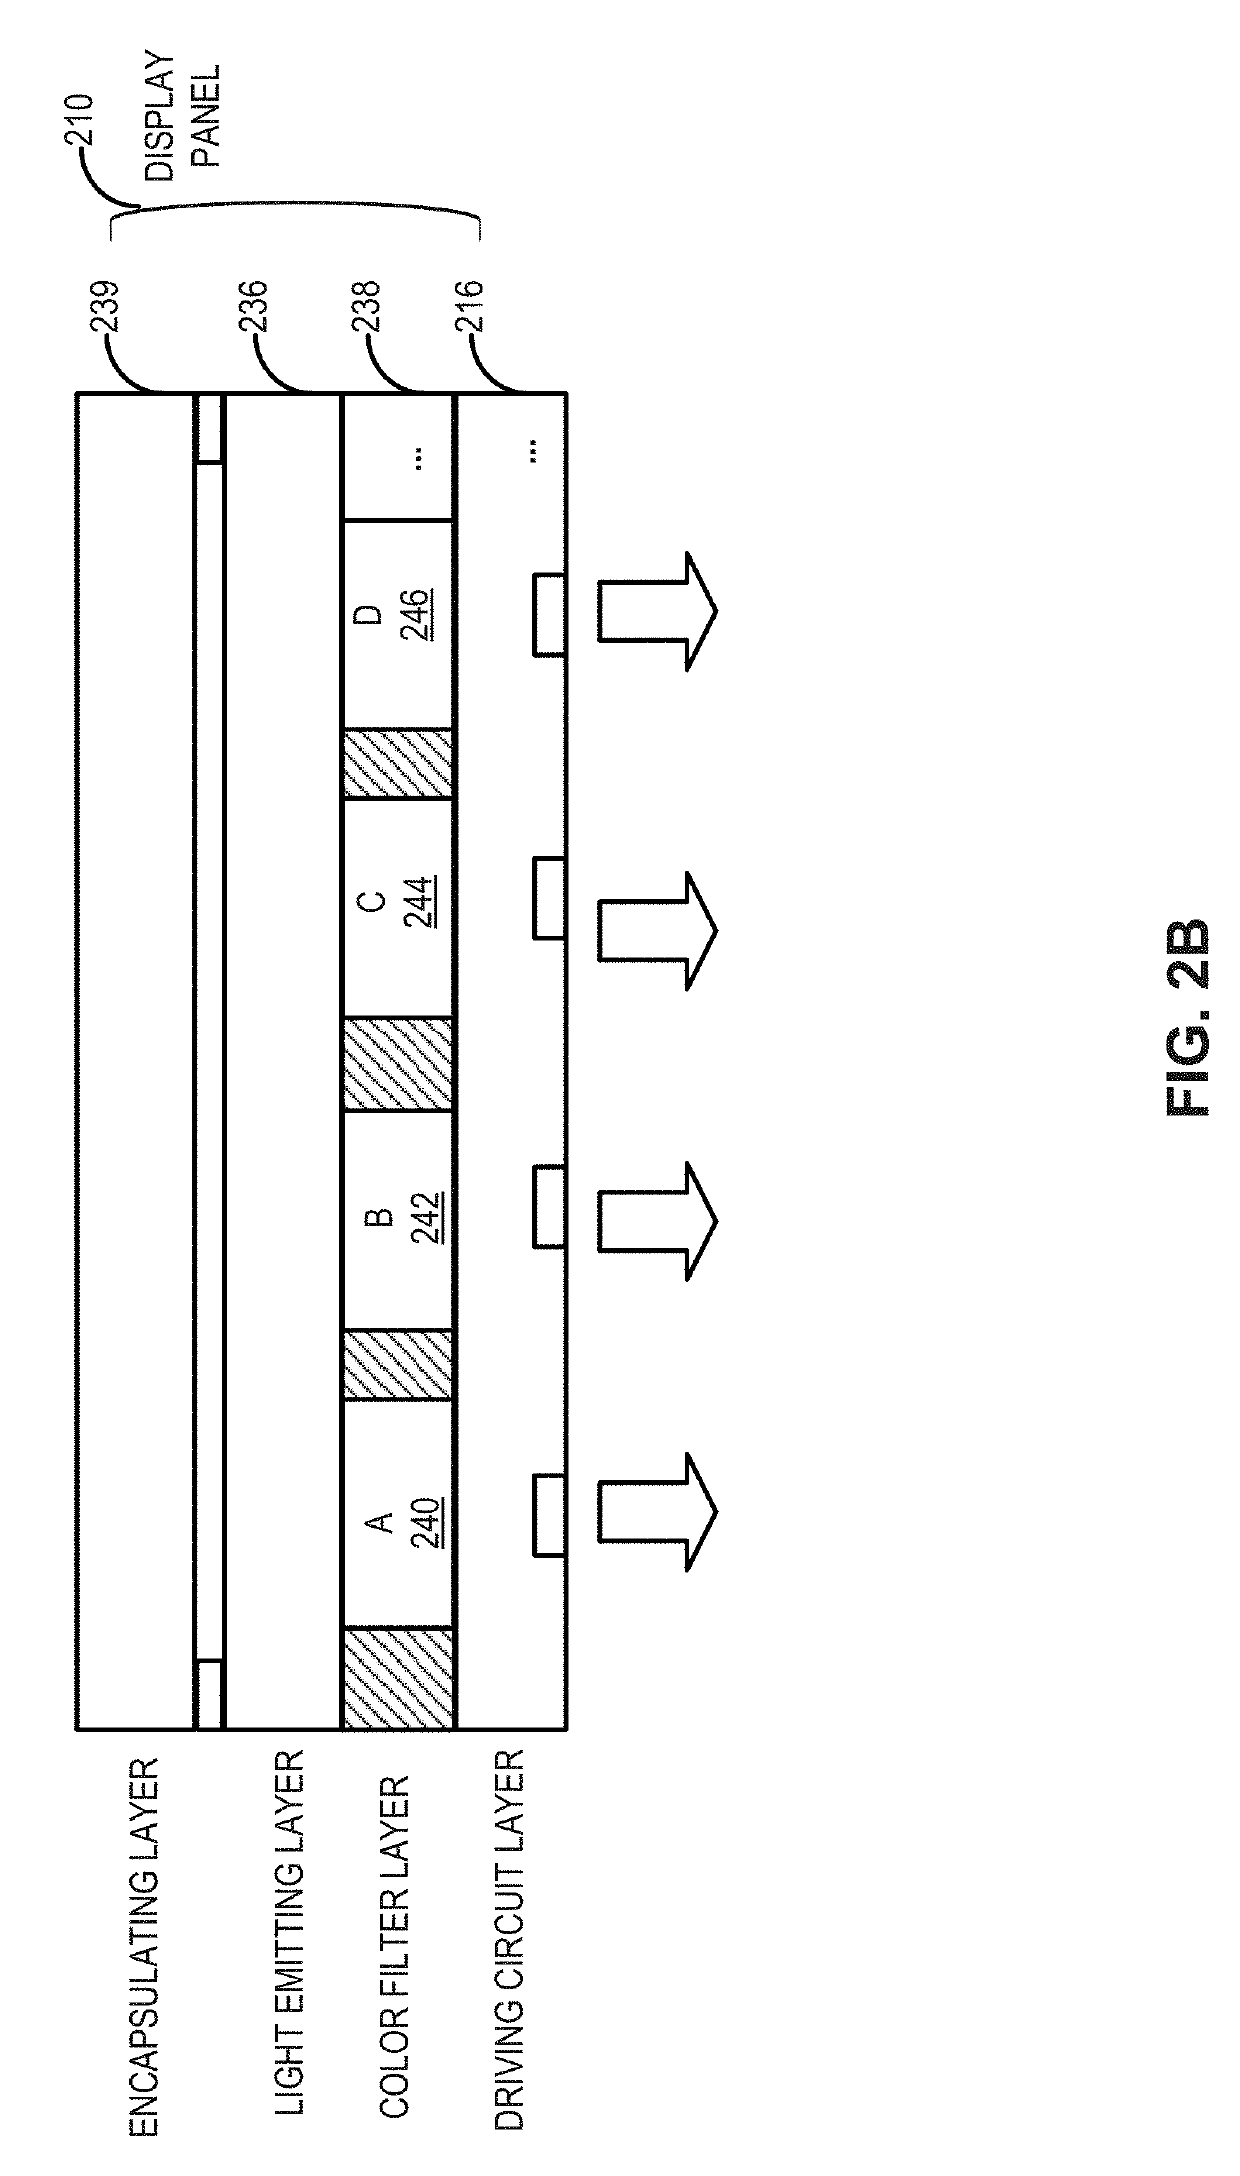 Zone-based display data processing and transmission